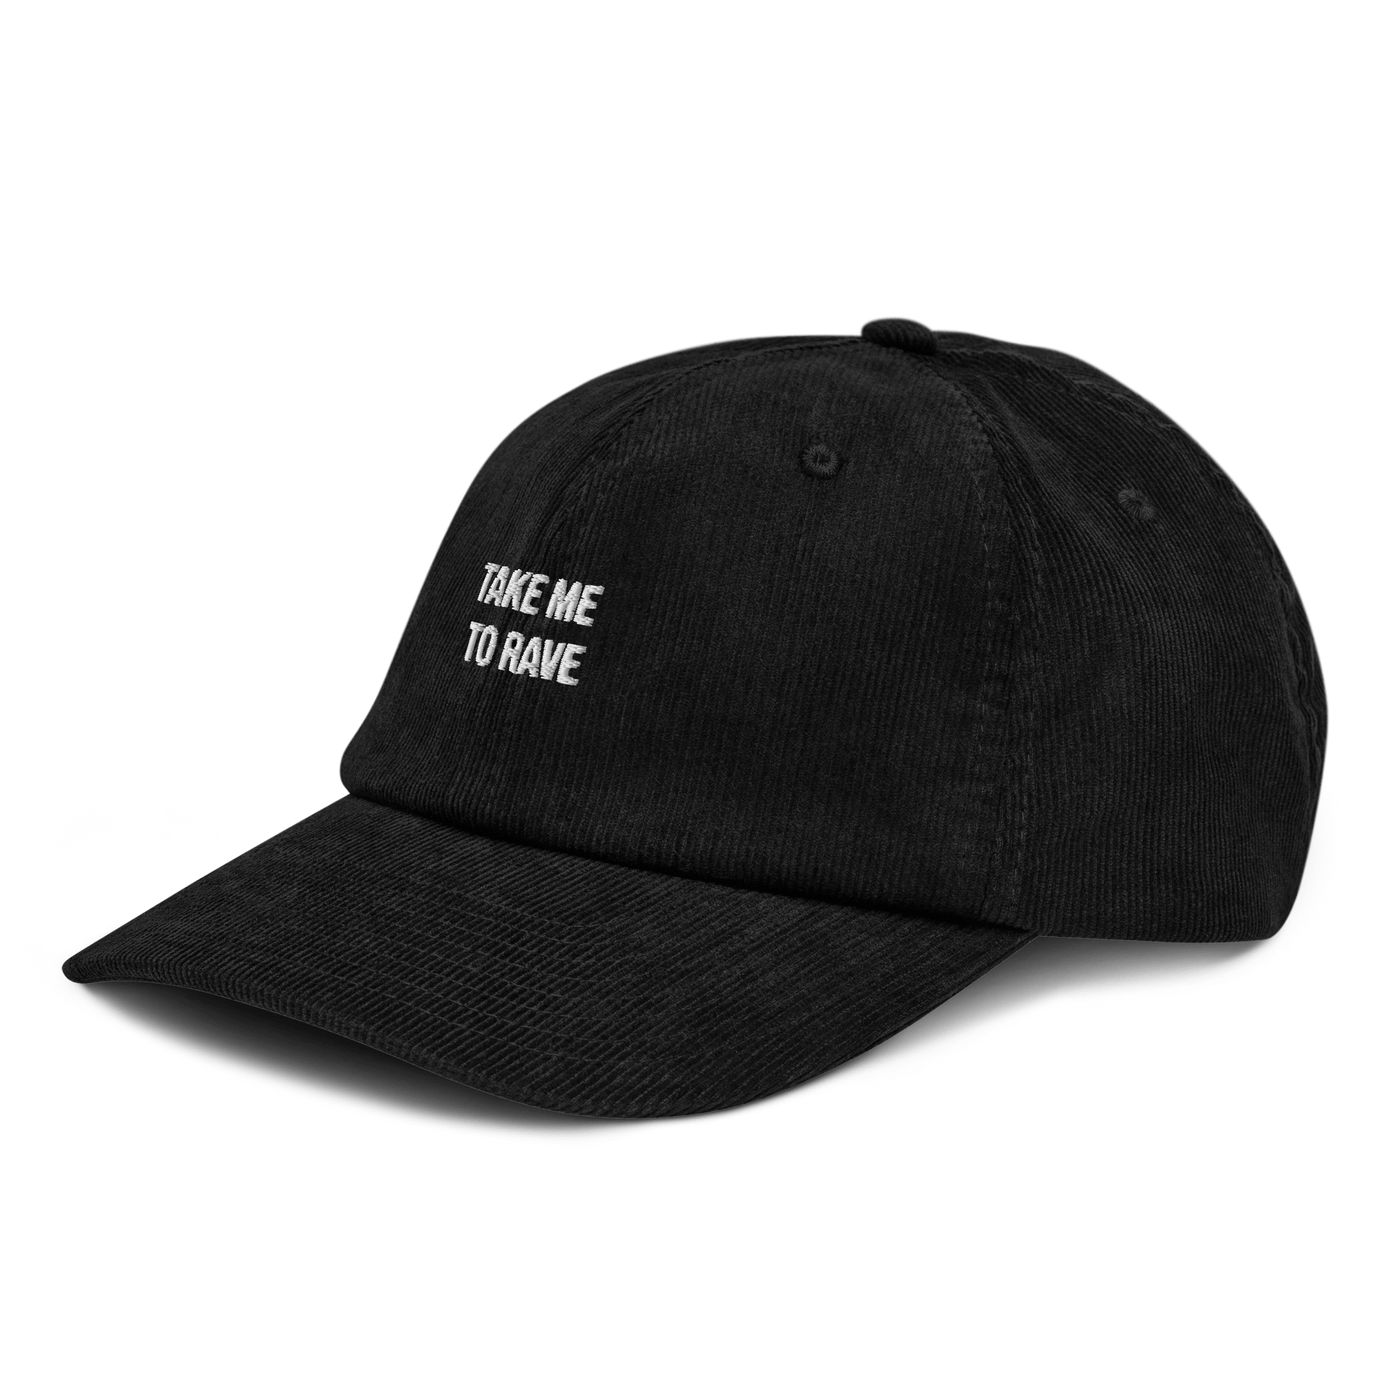 Take me to rave Corduroy hat - Black - - Just Another Cap Store